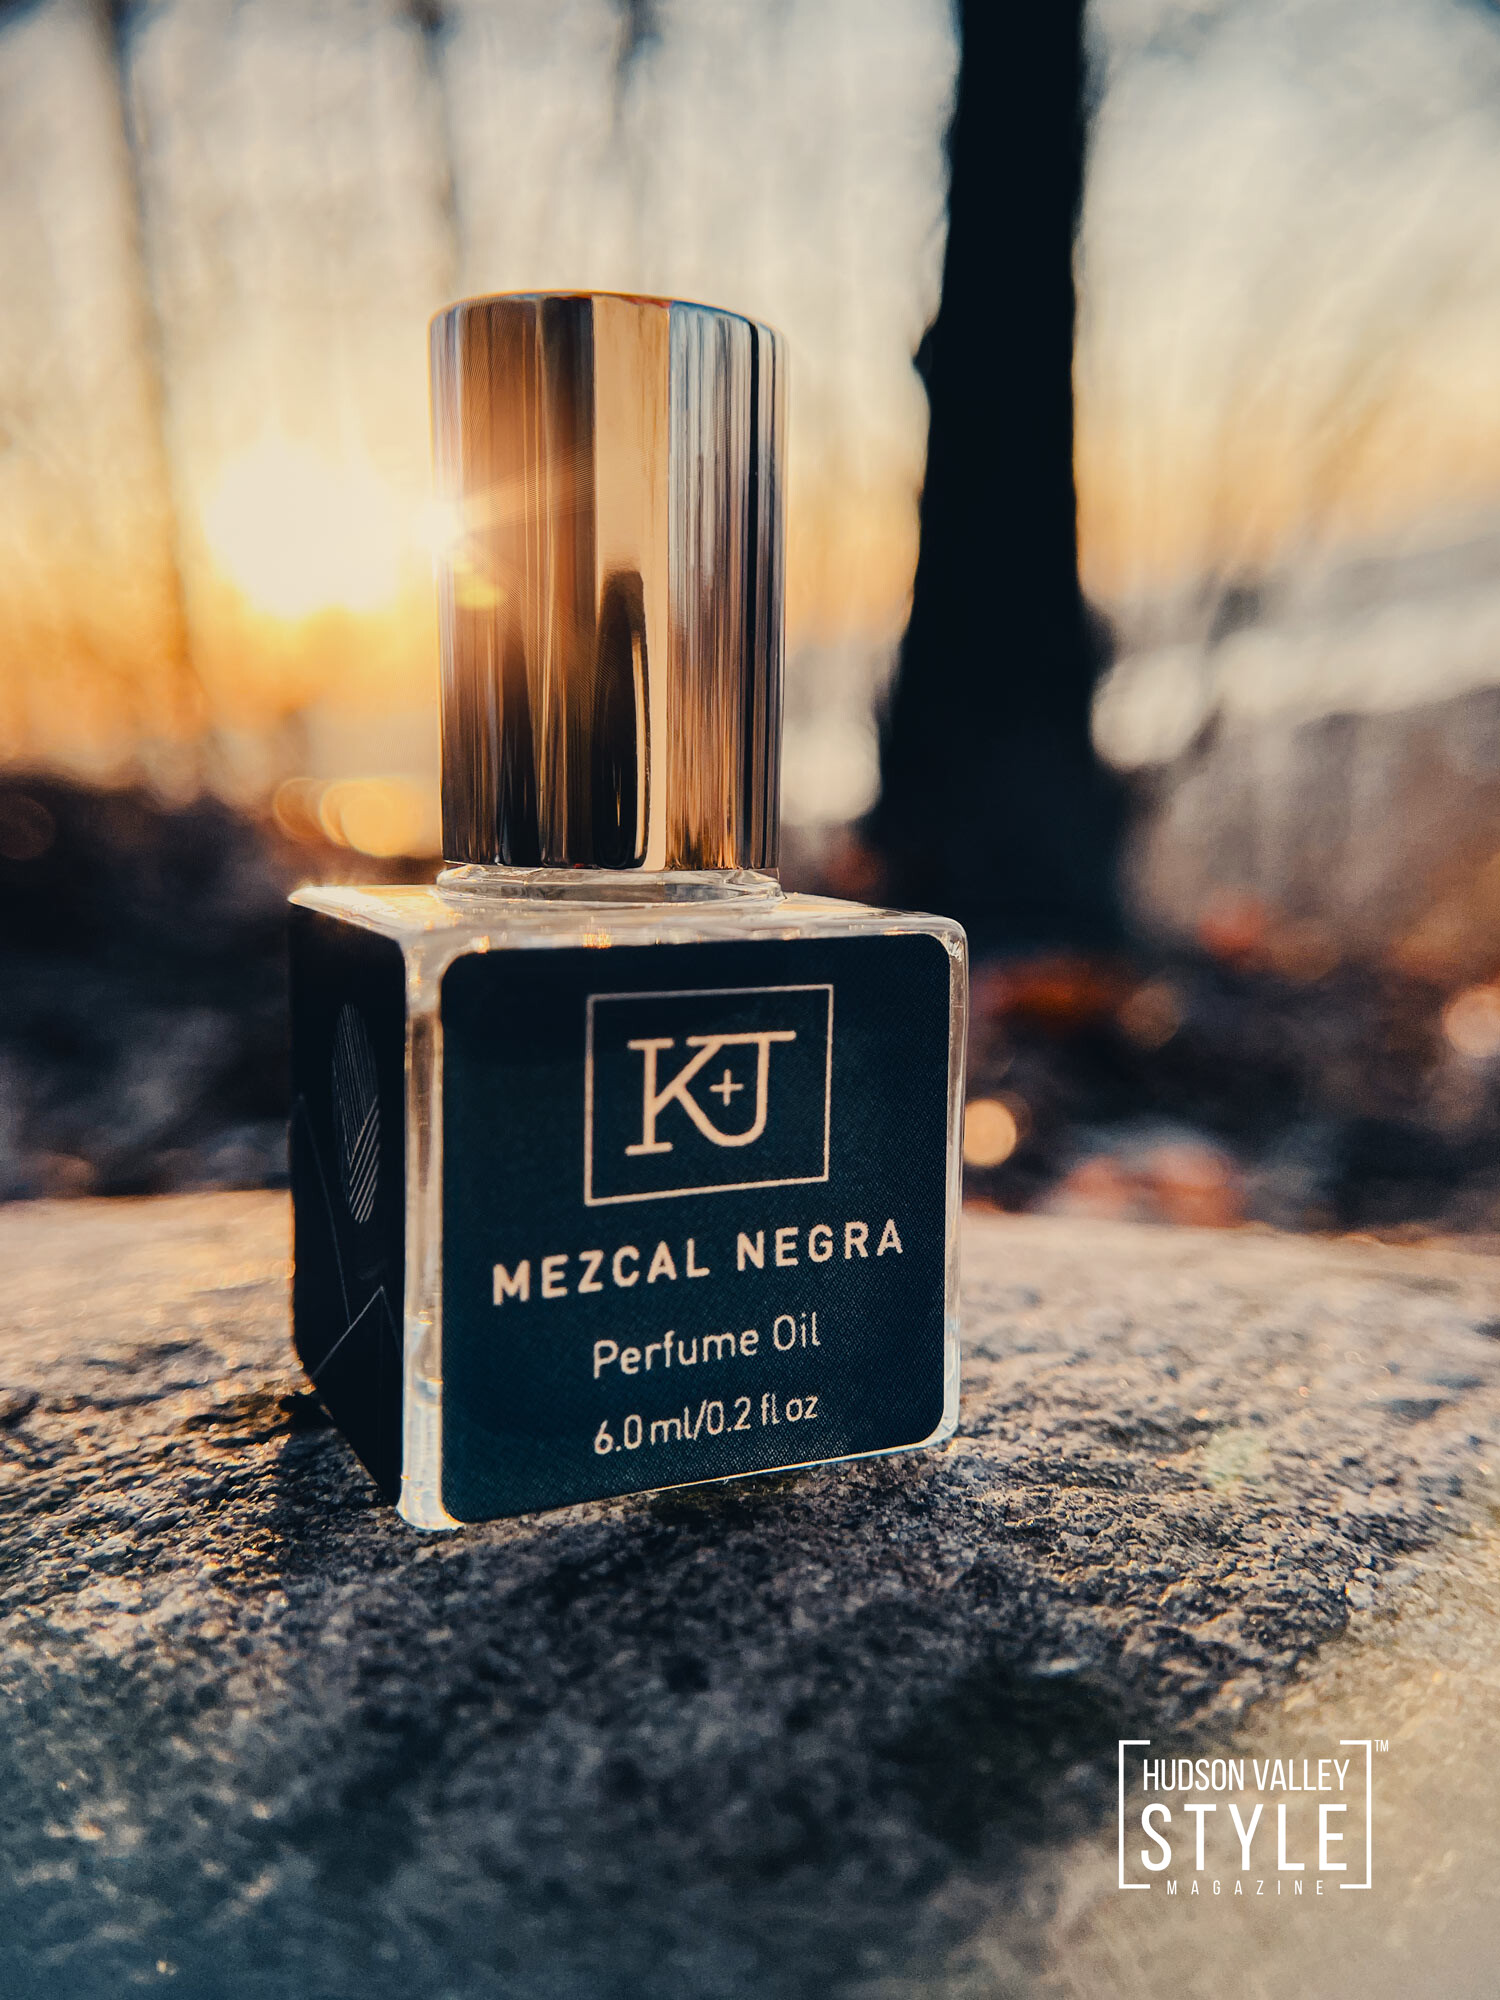 Journey into the agave fields of Mexico with Eau de Mezcal – fragrance inspired by the world’s most enrapturing spirit.